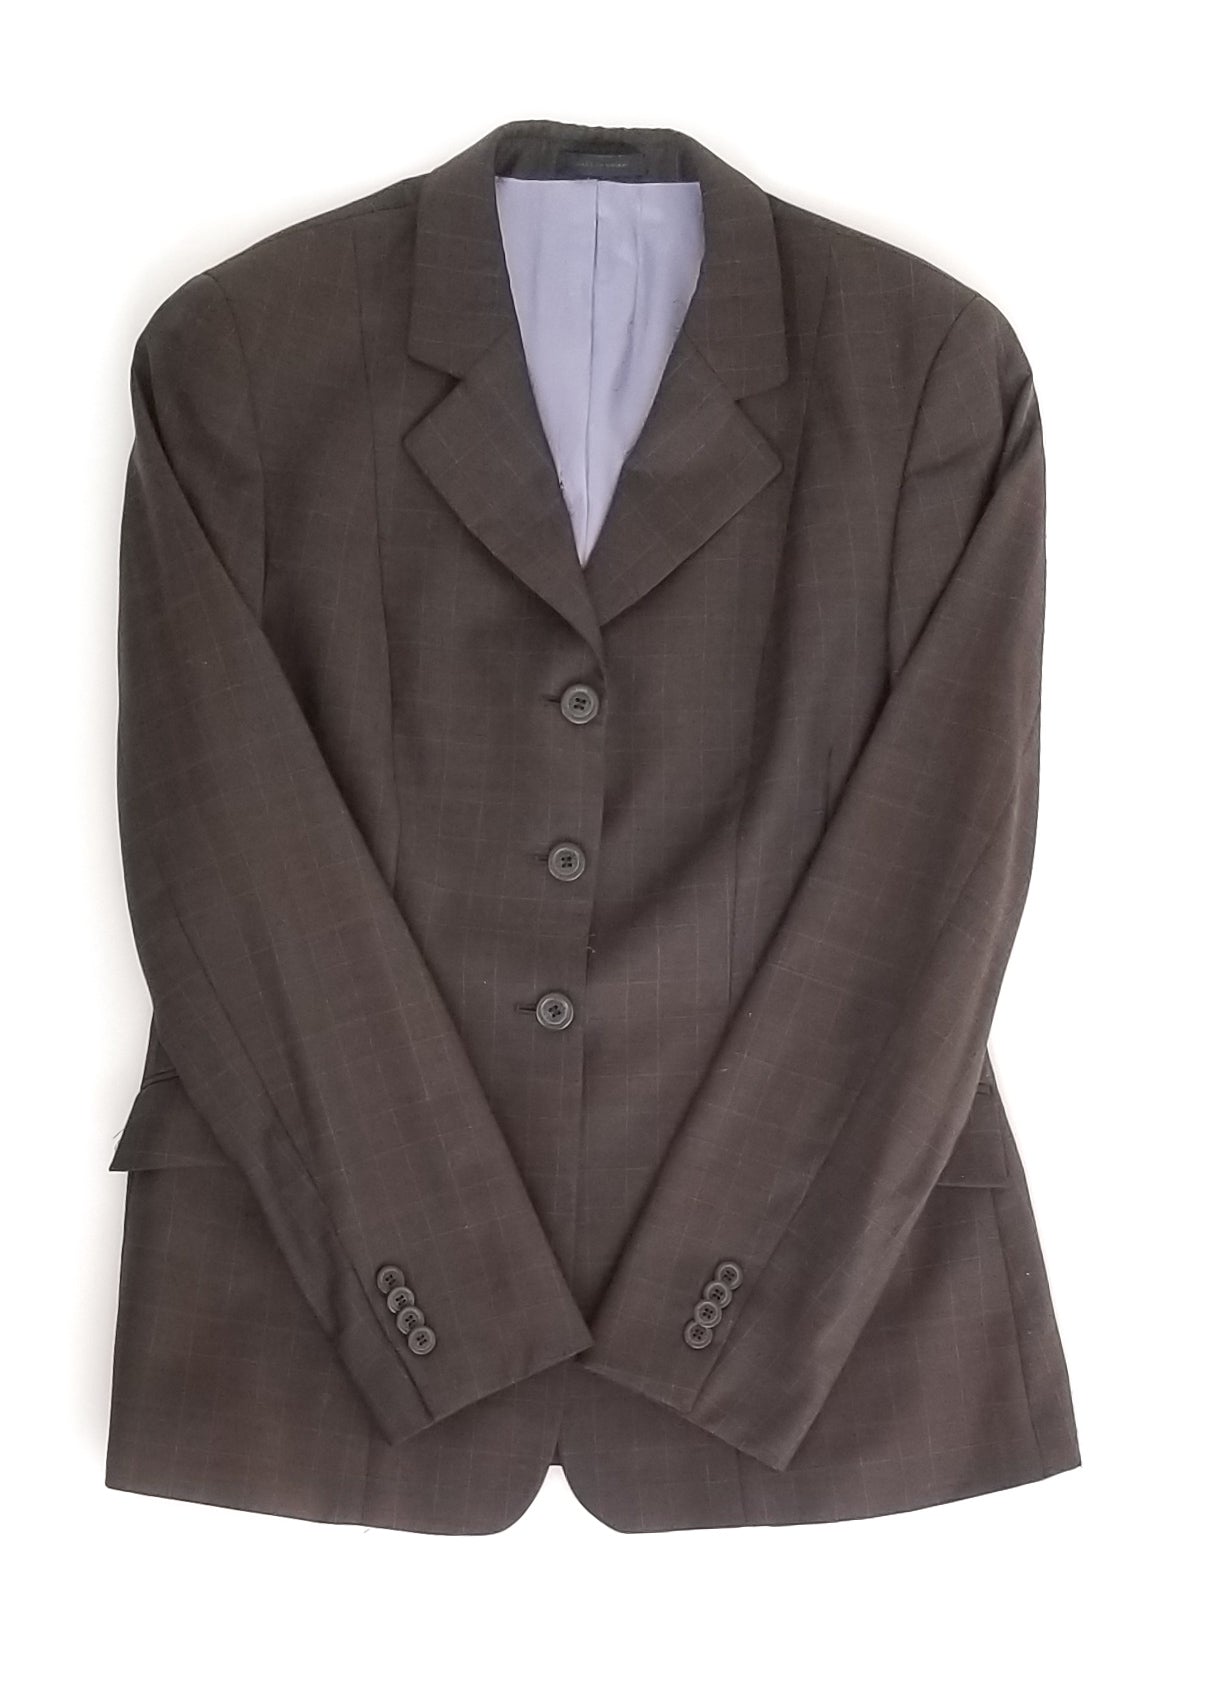 RJ Classics Sterling Collection Wool Show Jacket - Brown w/ Purple Windowpane - 8R